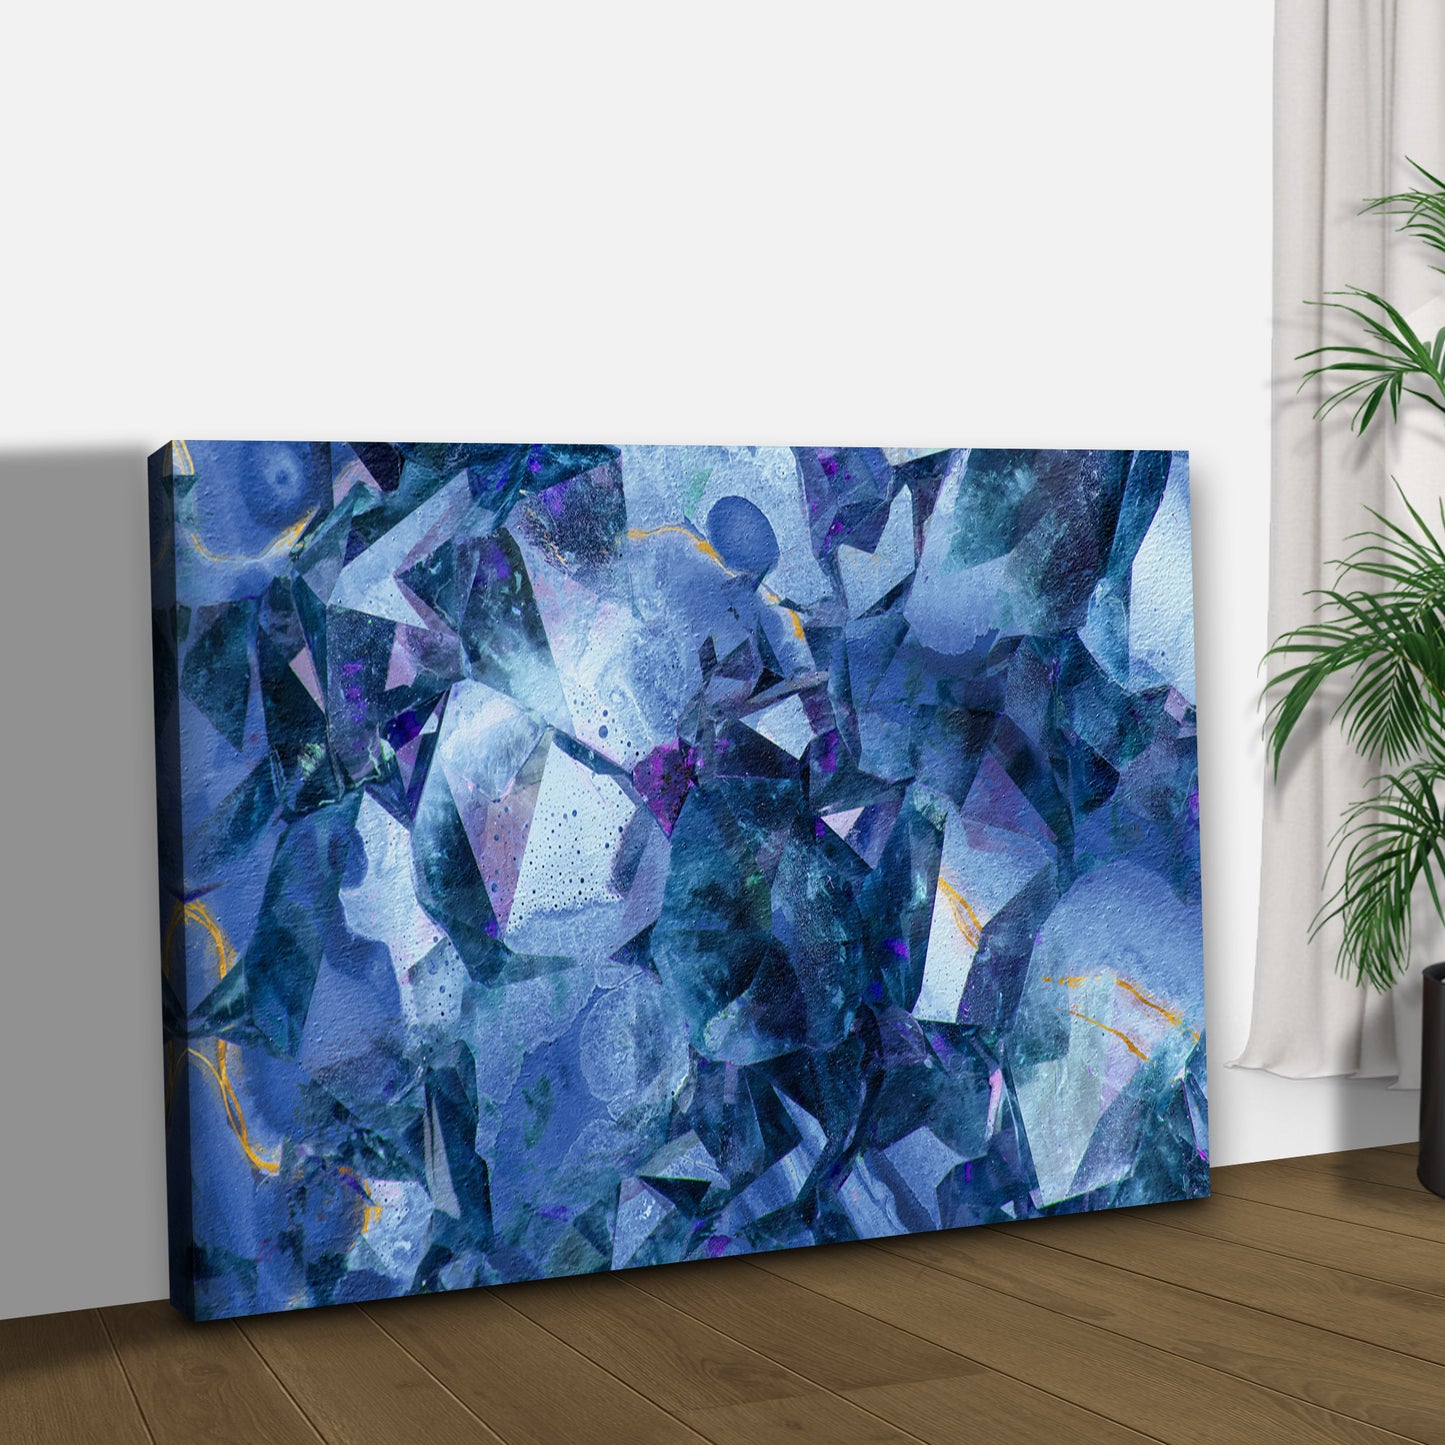 Decor Elements Crystals Blue Stone Canvas Wall Art Style 2 - Image by Tailored Canvases